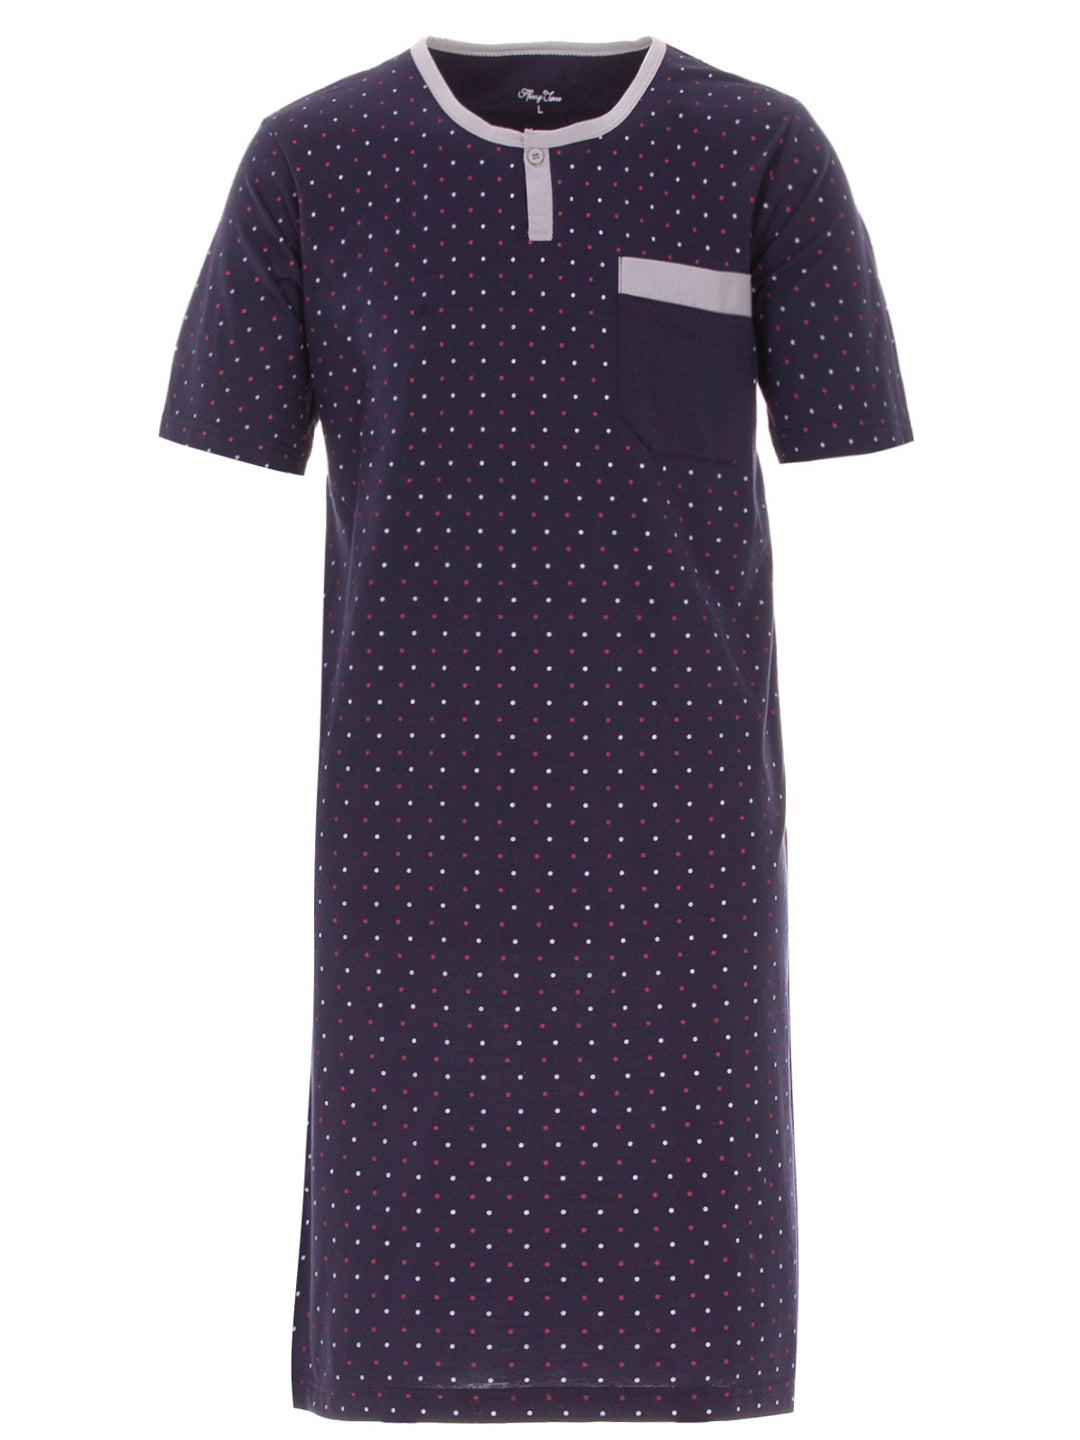 Nightgown short sleeves - dots